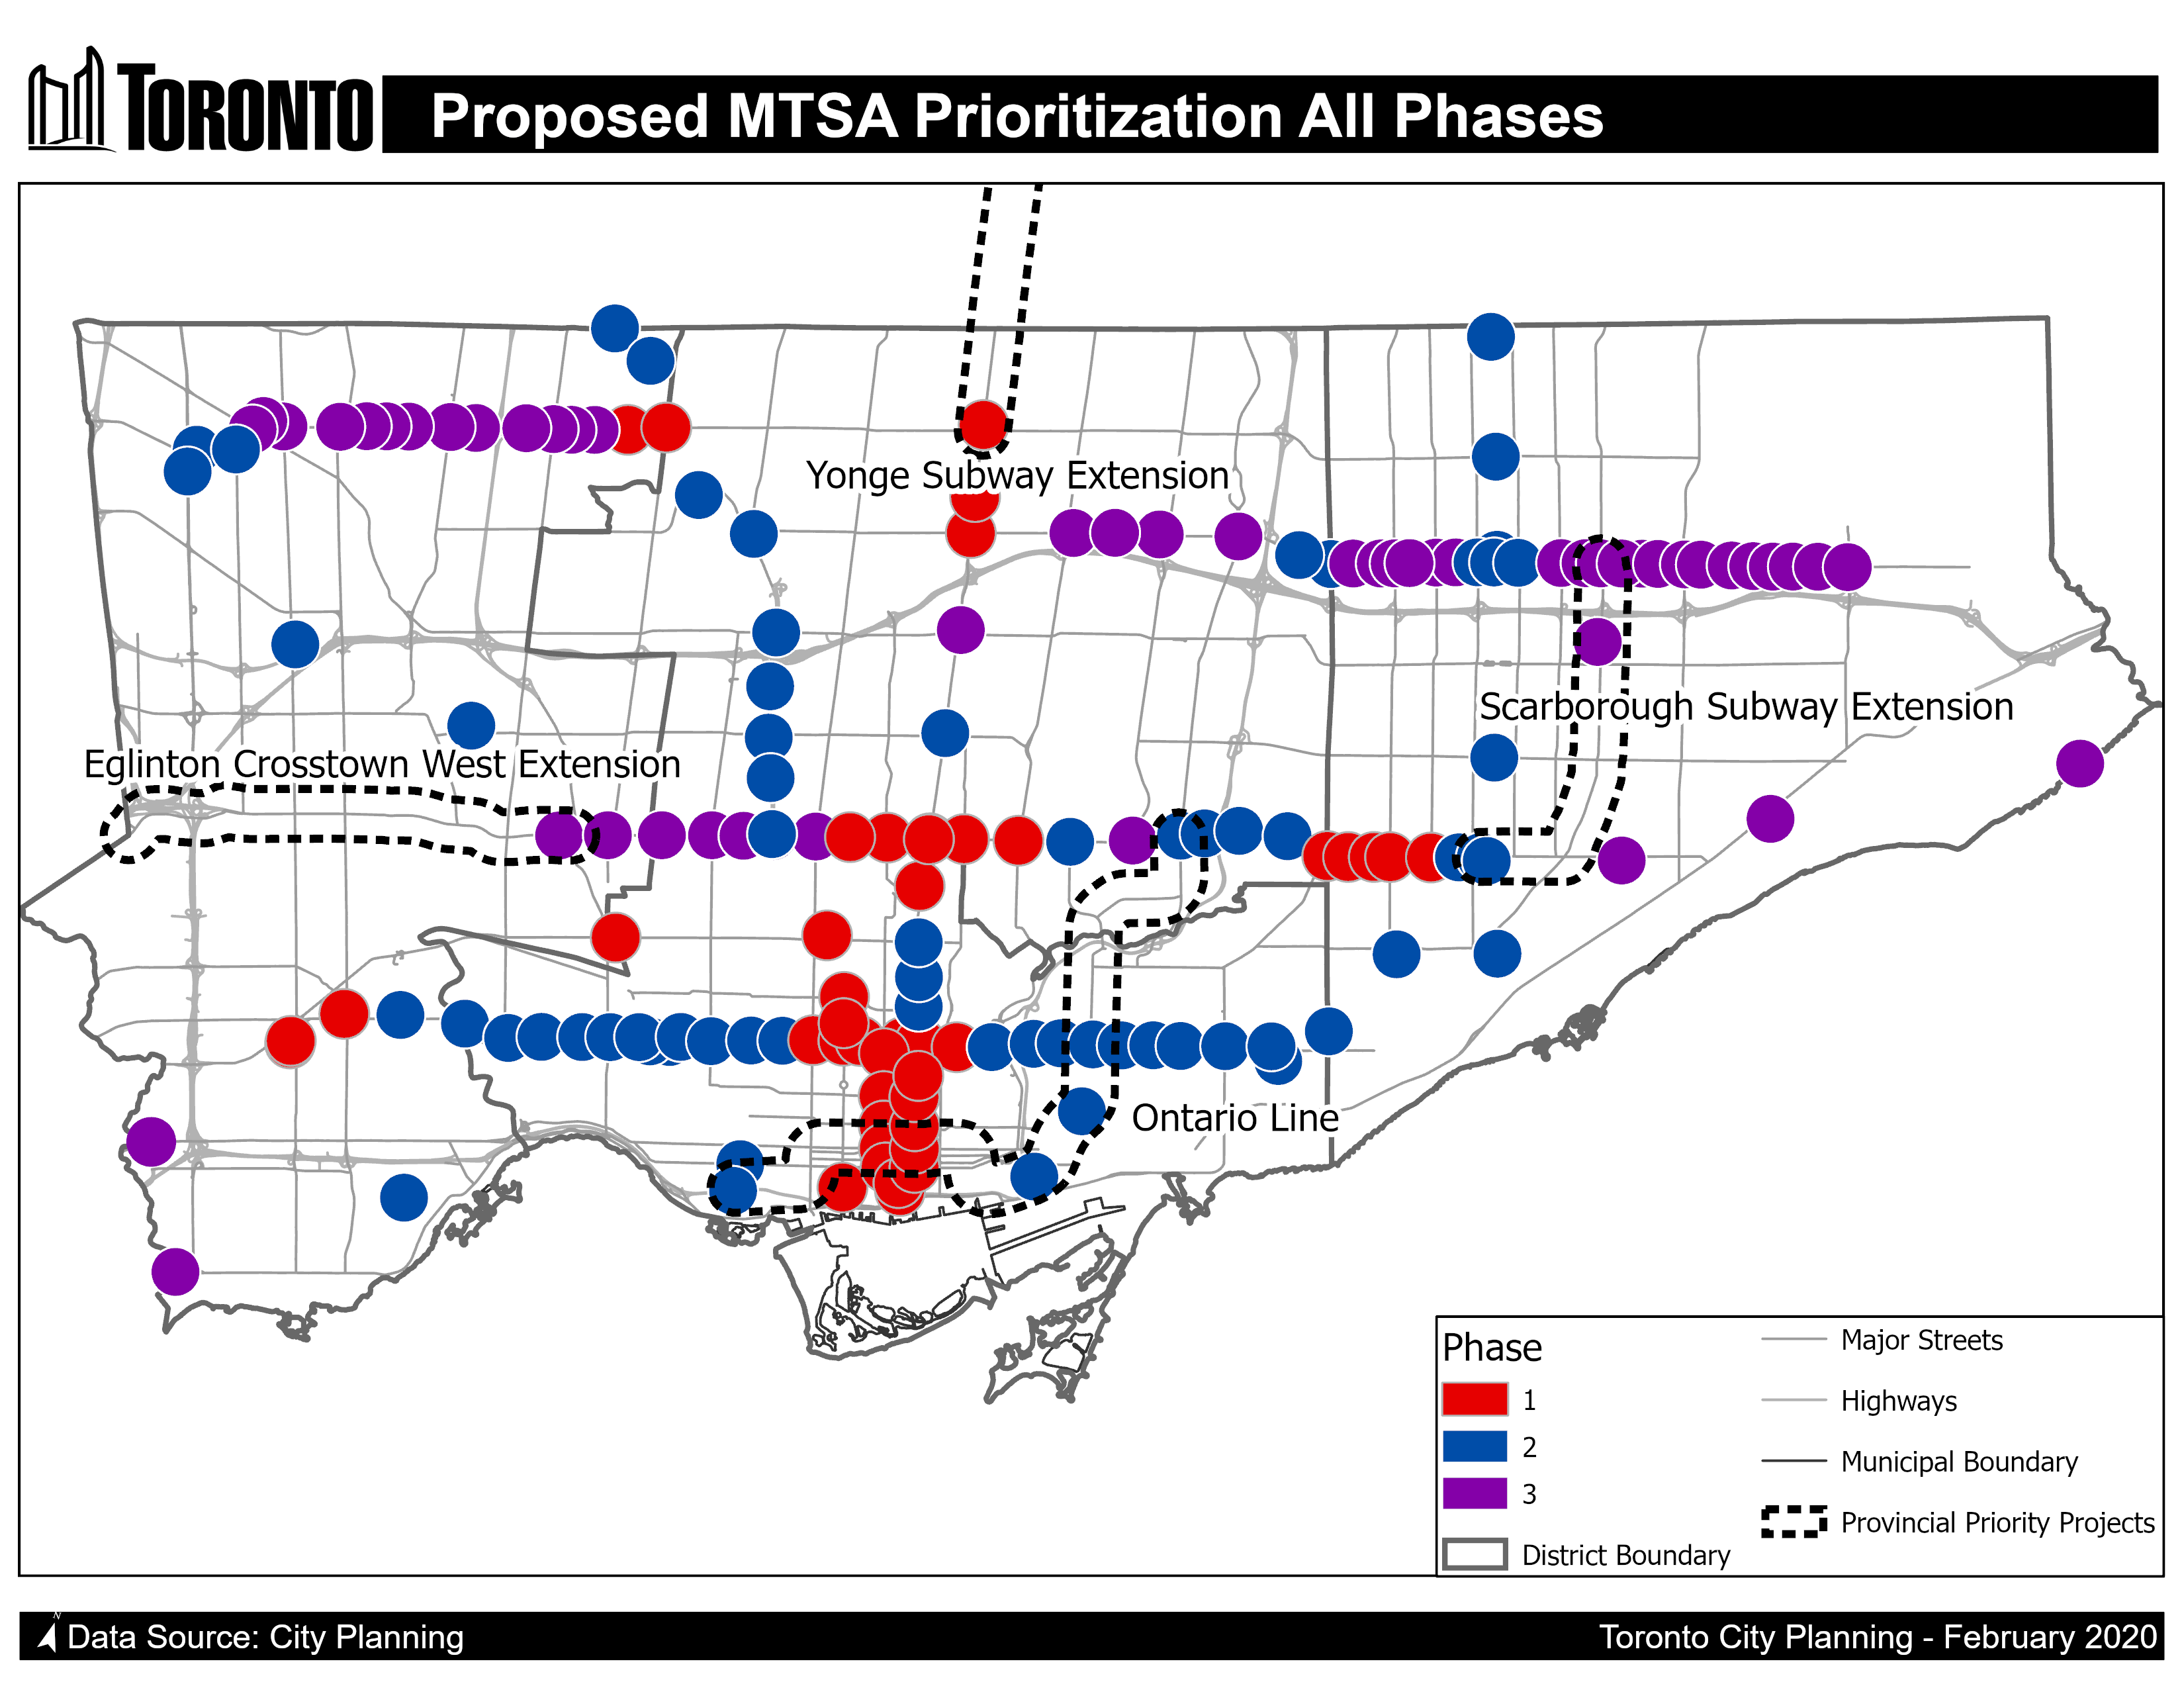 Map of proposed MTSA Prioritization All Phases - Red dots indicate major streets, blue dots indicate highways, and purple dots indicate municipal boundaries